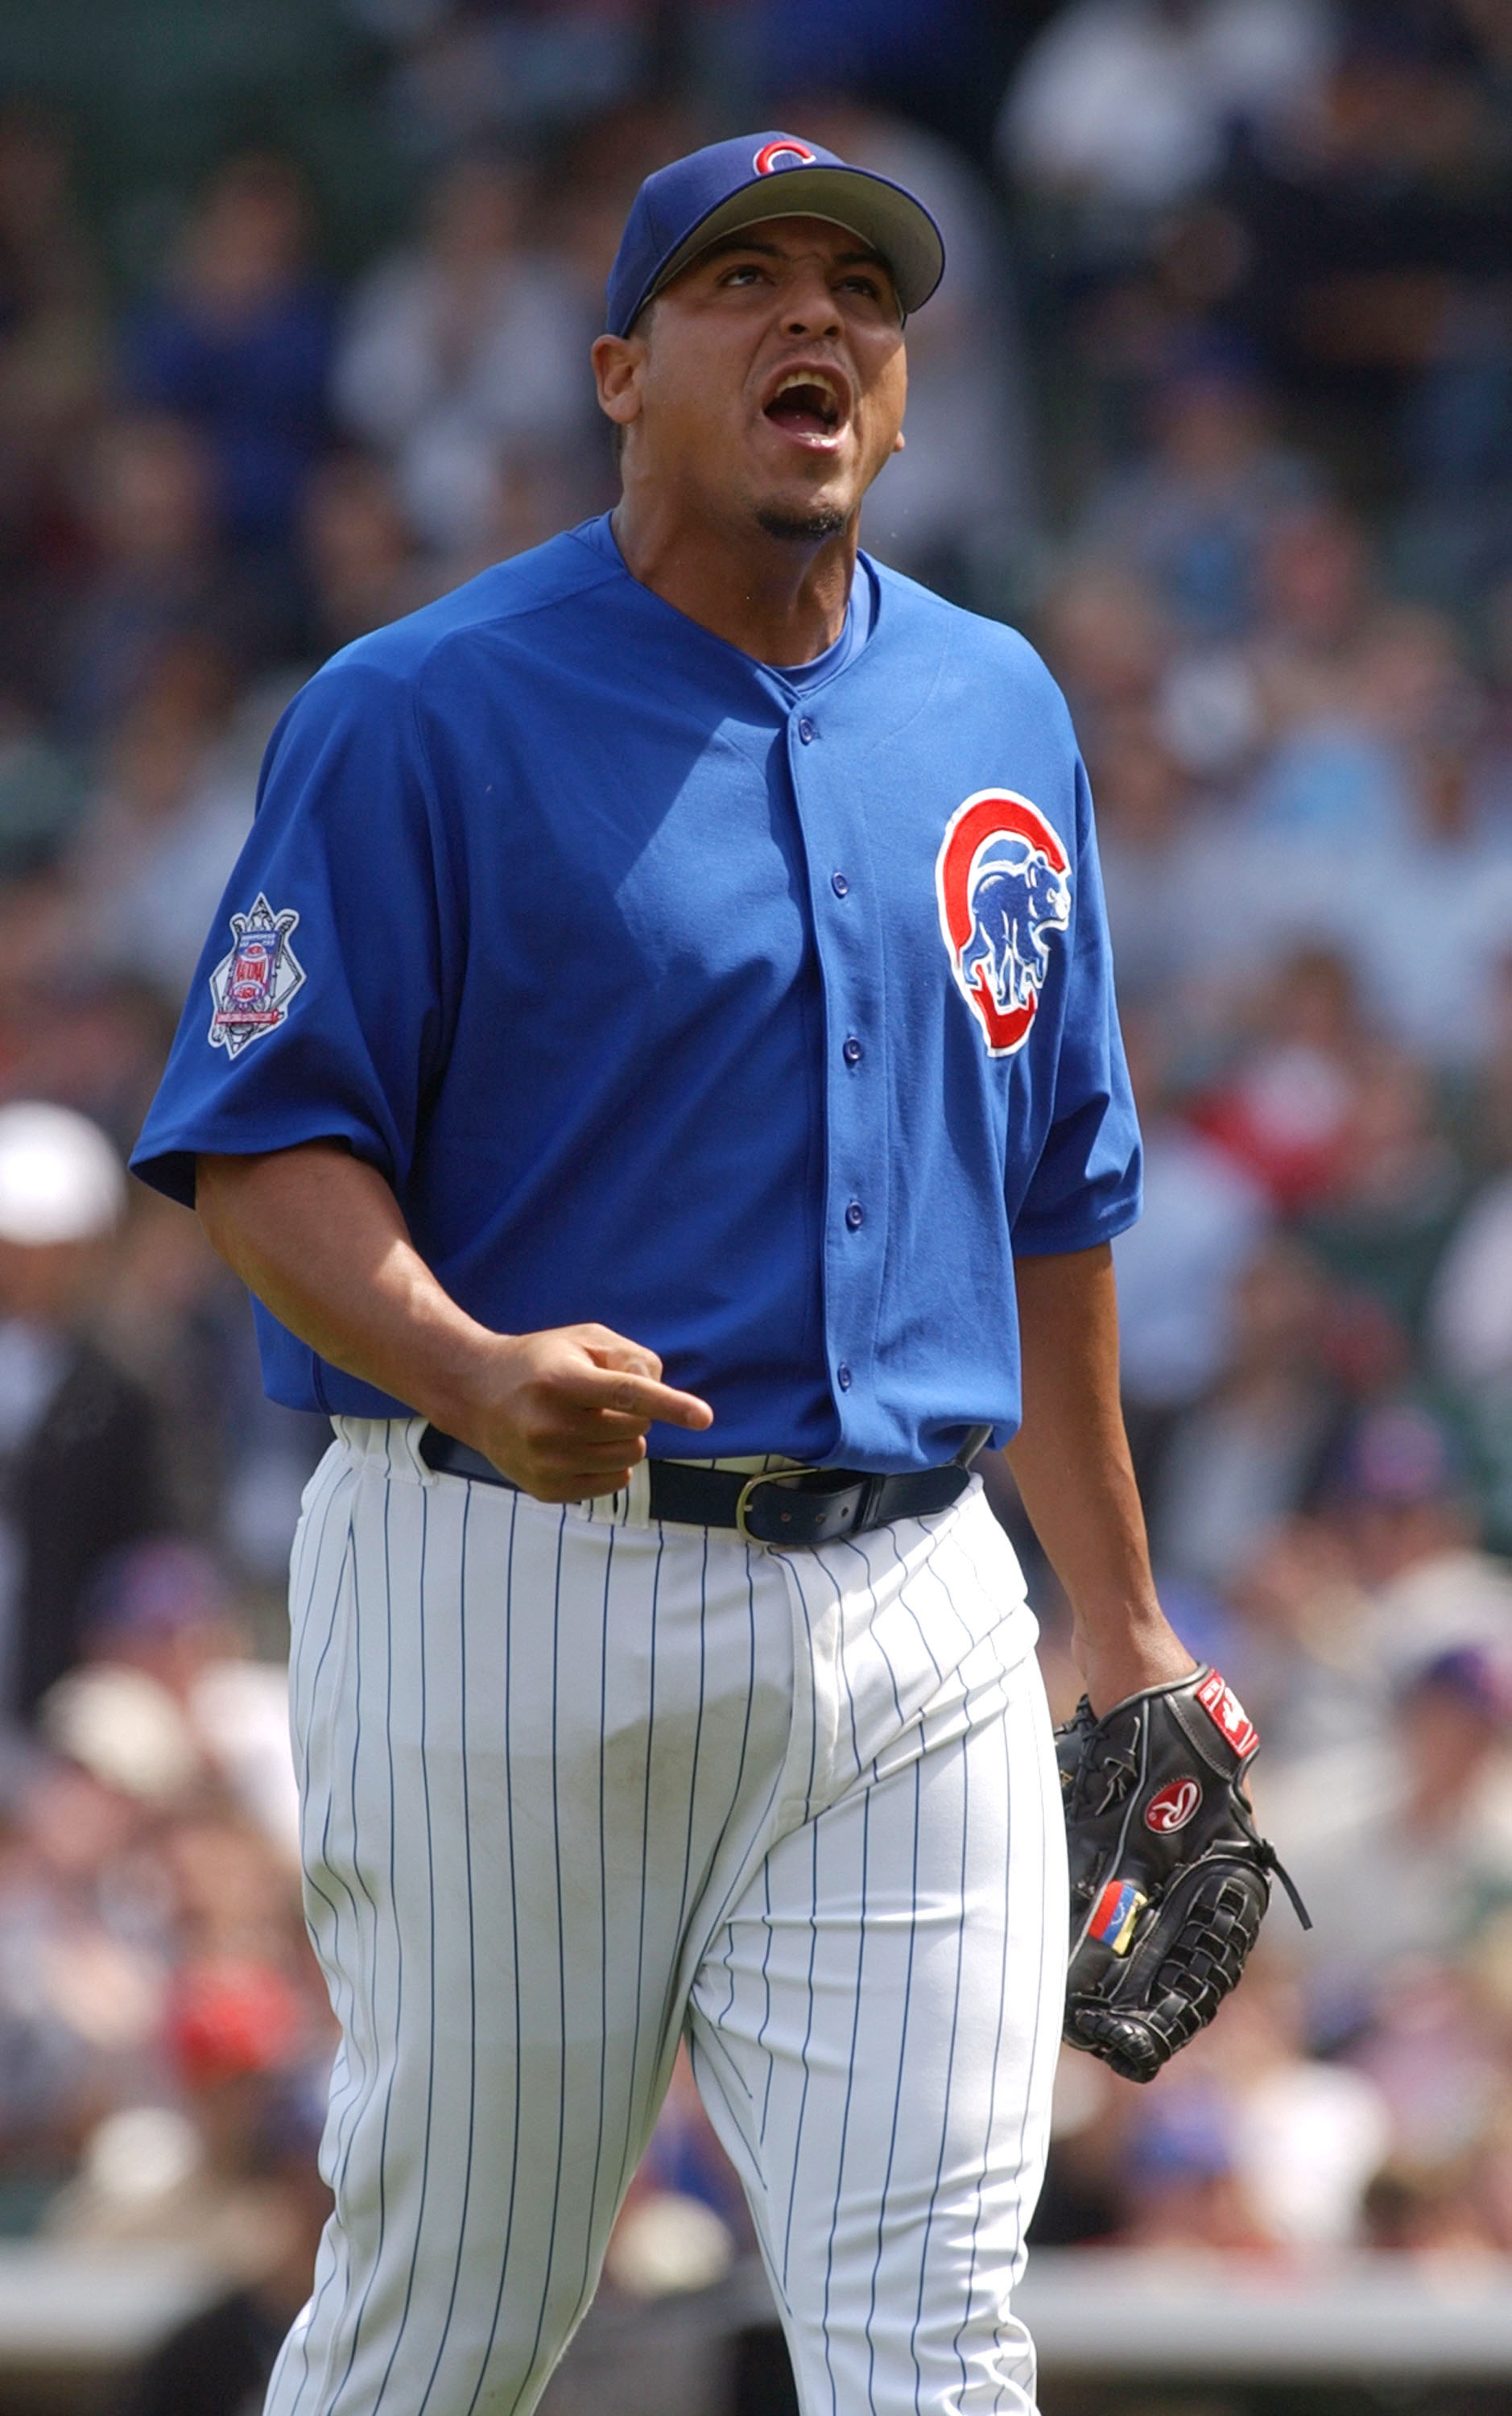 CHICAGO - APRIL 15:  Starting pitcher Carlos Zambrano #38 of the Chicago Cubs yells in celebration after striking out Craig Wilson of the Pittsburgh Pirates to end the first inning April 15, 2004 at Wrigley Field in Chicago, Illinois. The Cubs defeated th